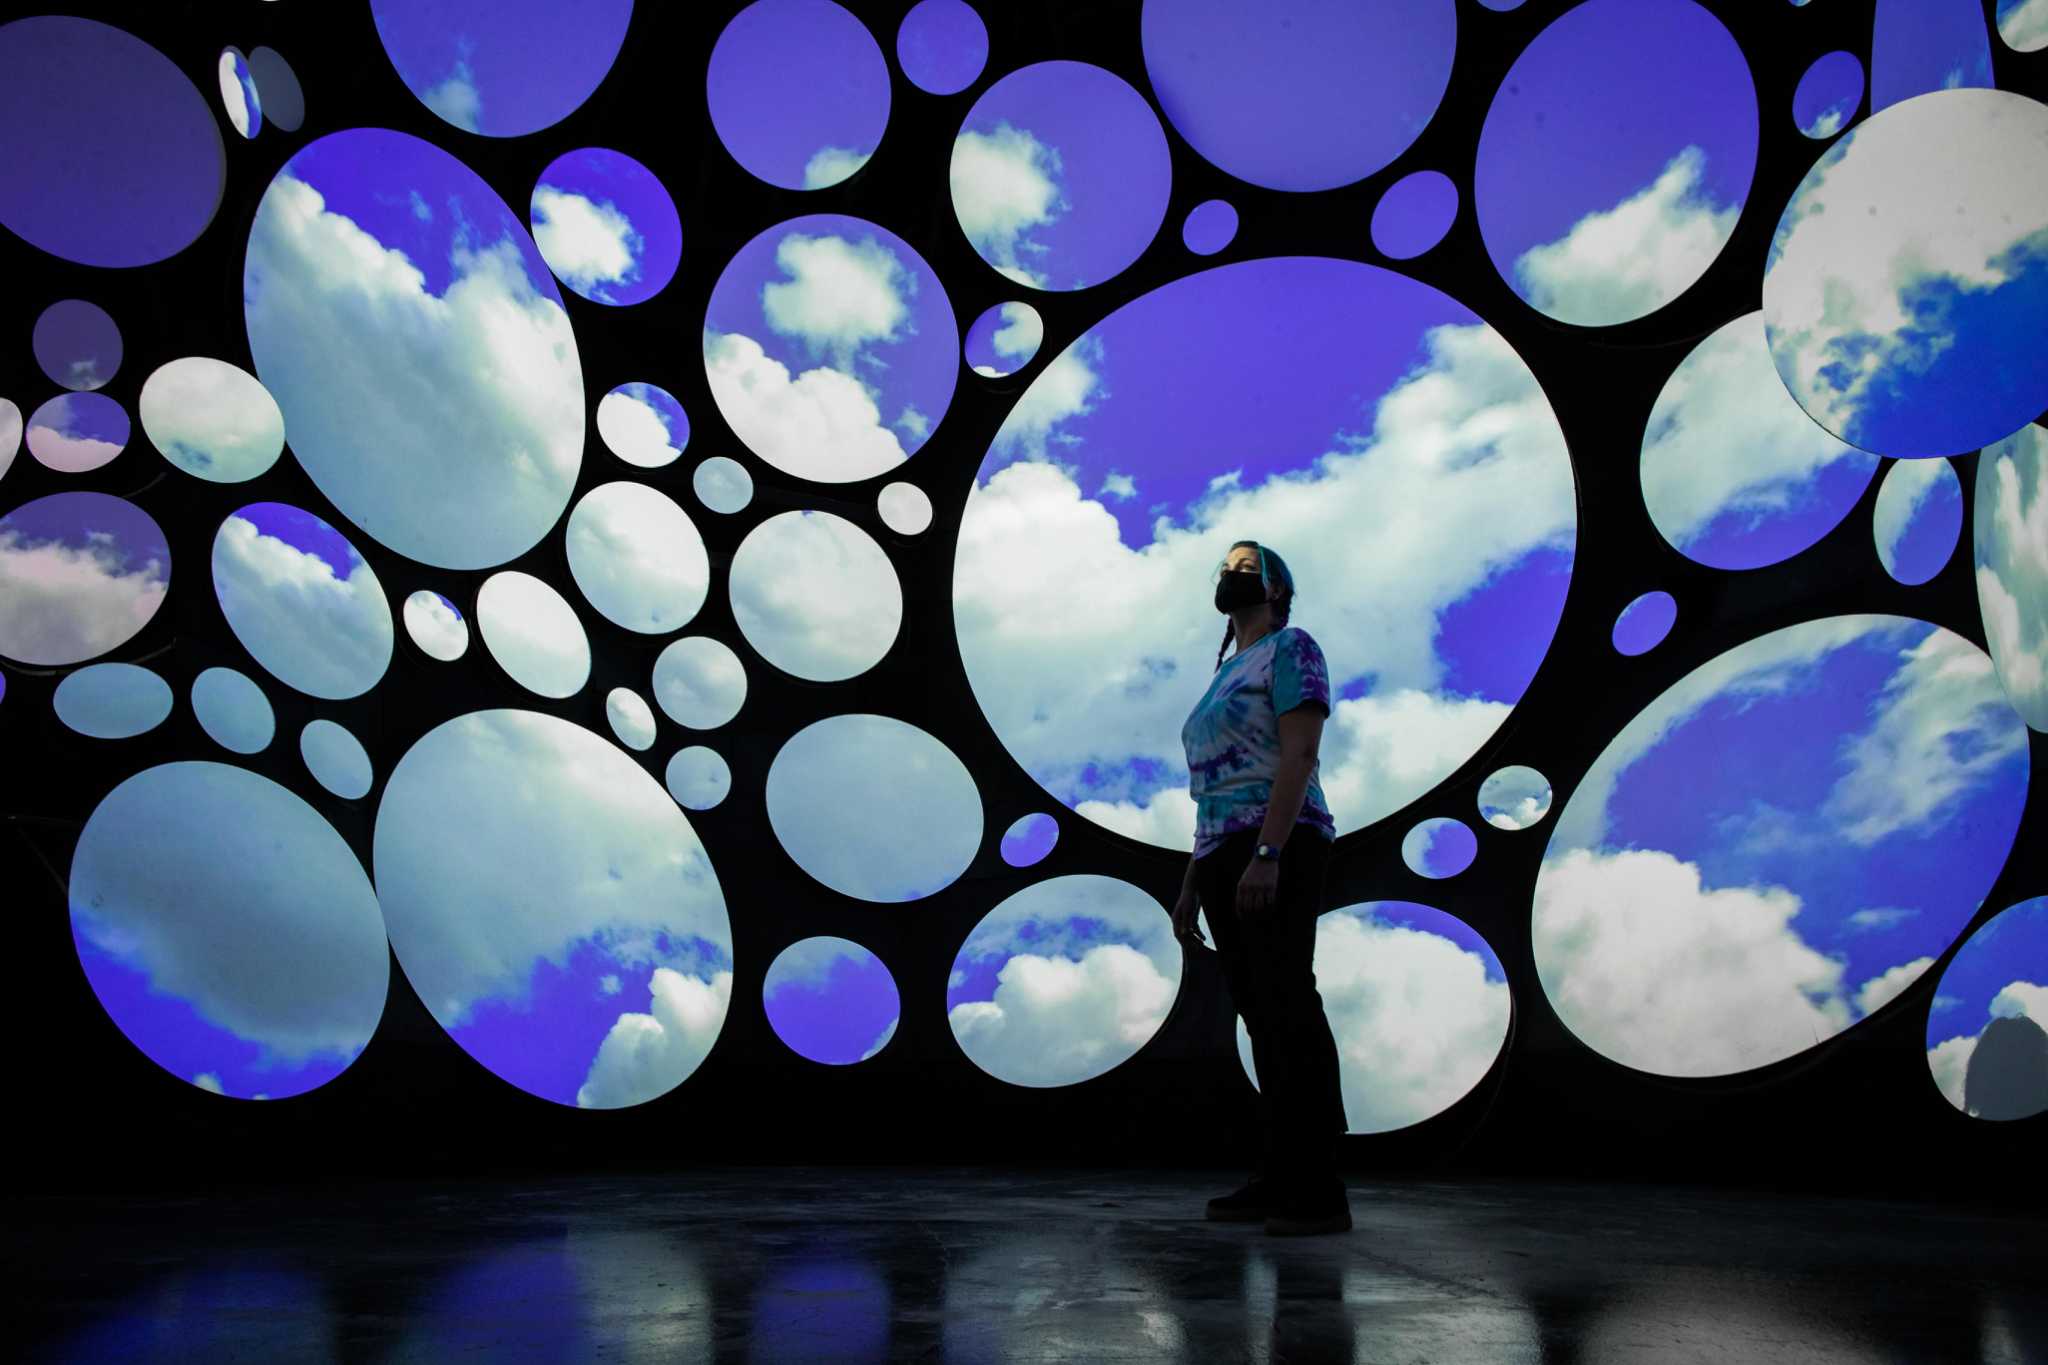 Seismique, a trippy immersive experience, is opening in an old bigbox